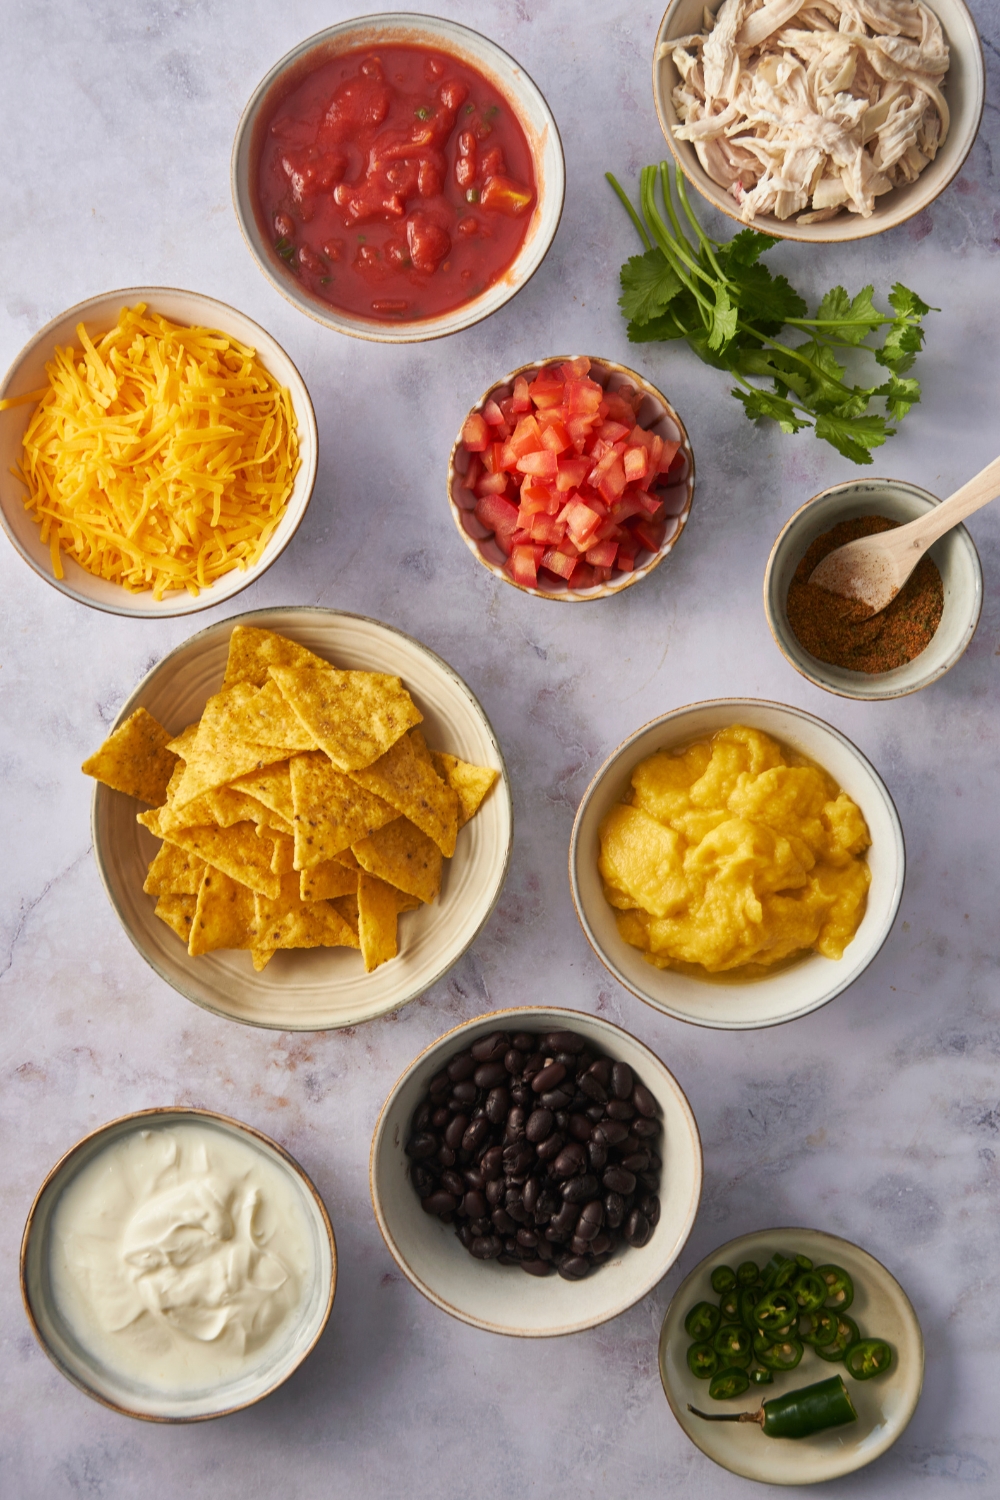 A bowl of black beans, a bowl of sour cream, a bowl of tortilla chips, bowl of shredded cheese, a bowl of diced tomatoes, a bowl of crushed tomatoes, edible shredded chicken all on a gray counter.